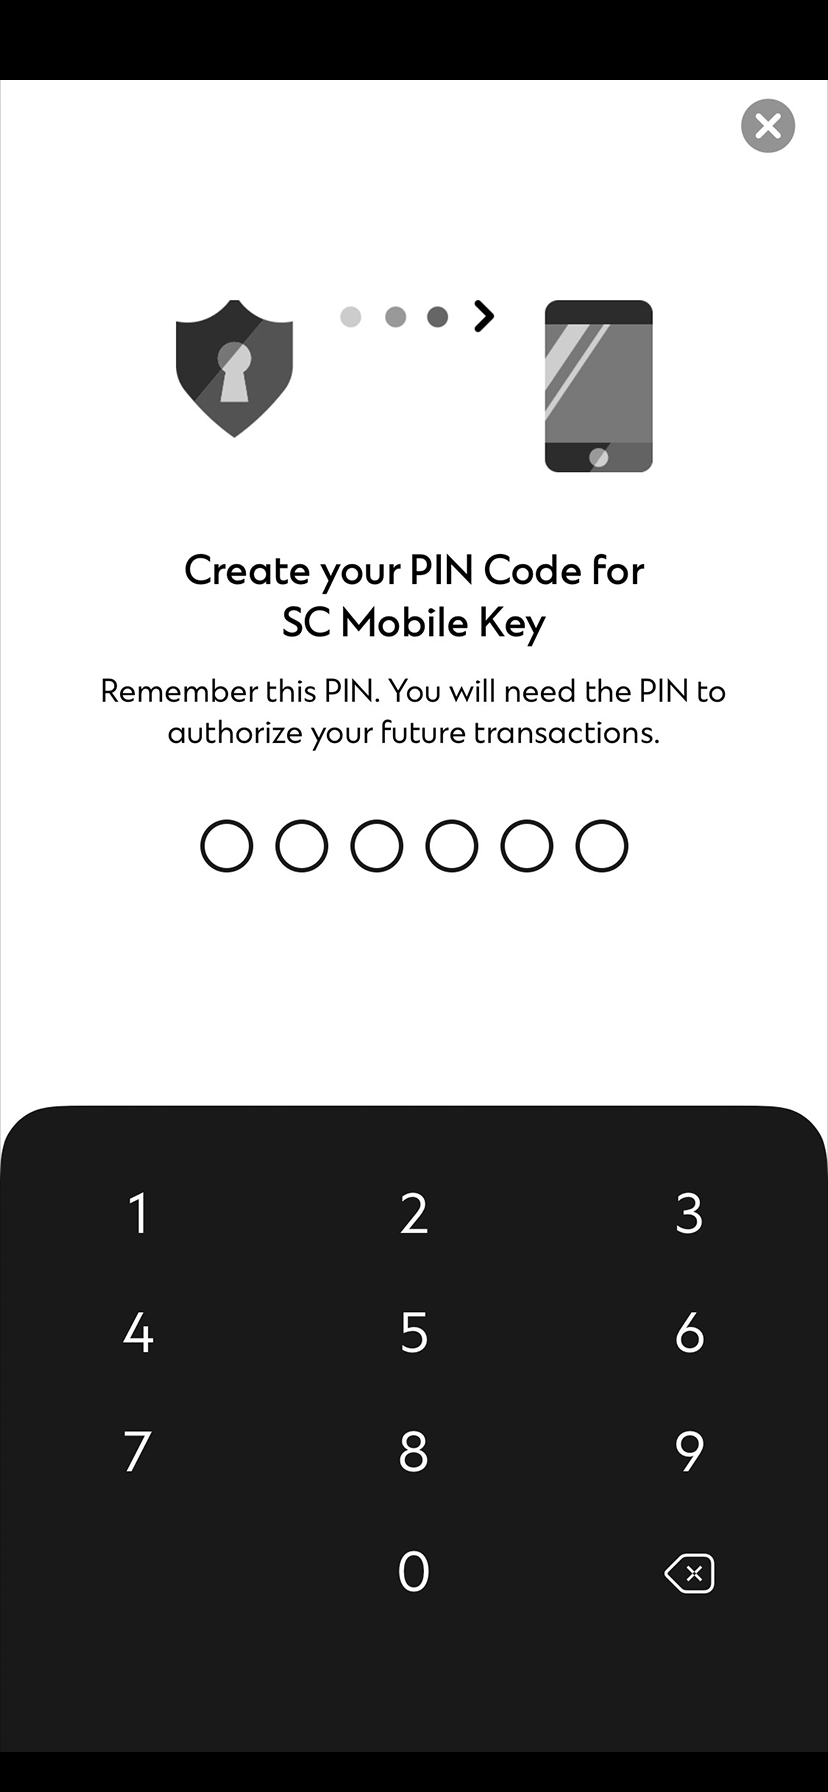 New to SC Mobile on Activate Push Notification in one go during SC Mobile Key registration Step 3